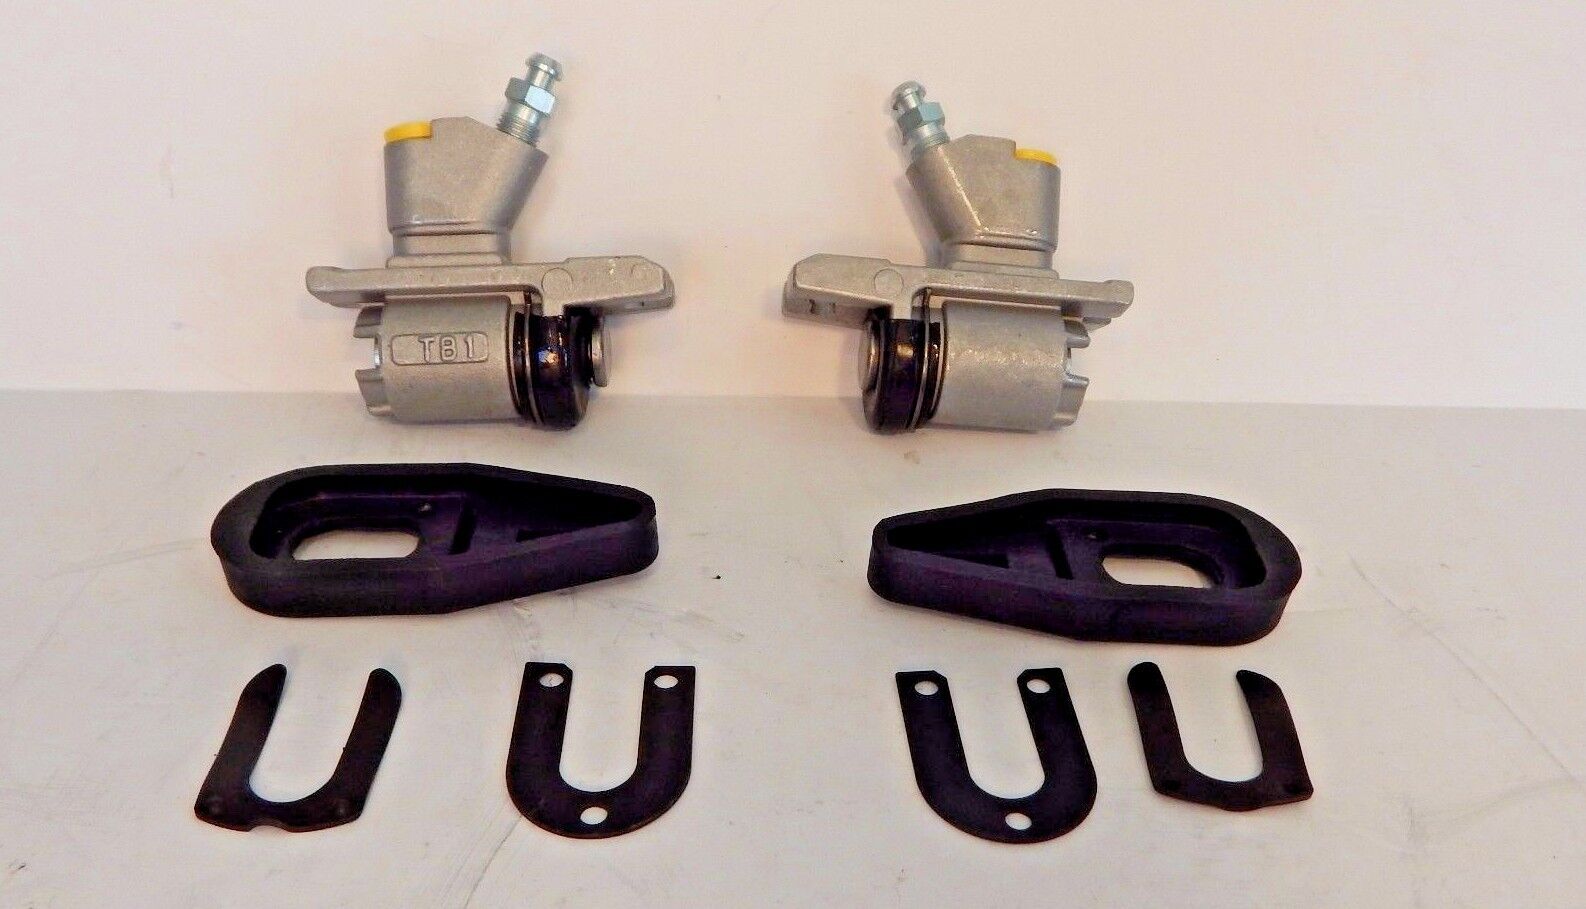 Pair of New Rear Wheel Cylinders & Hold Down Kit for Triumph Spitfire 1971-1975